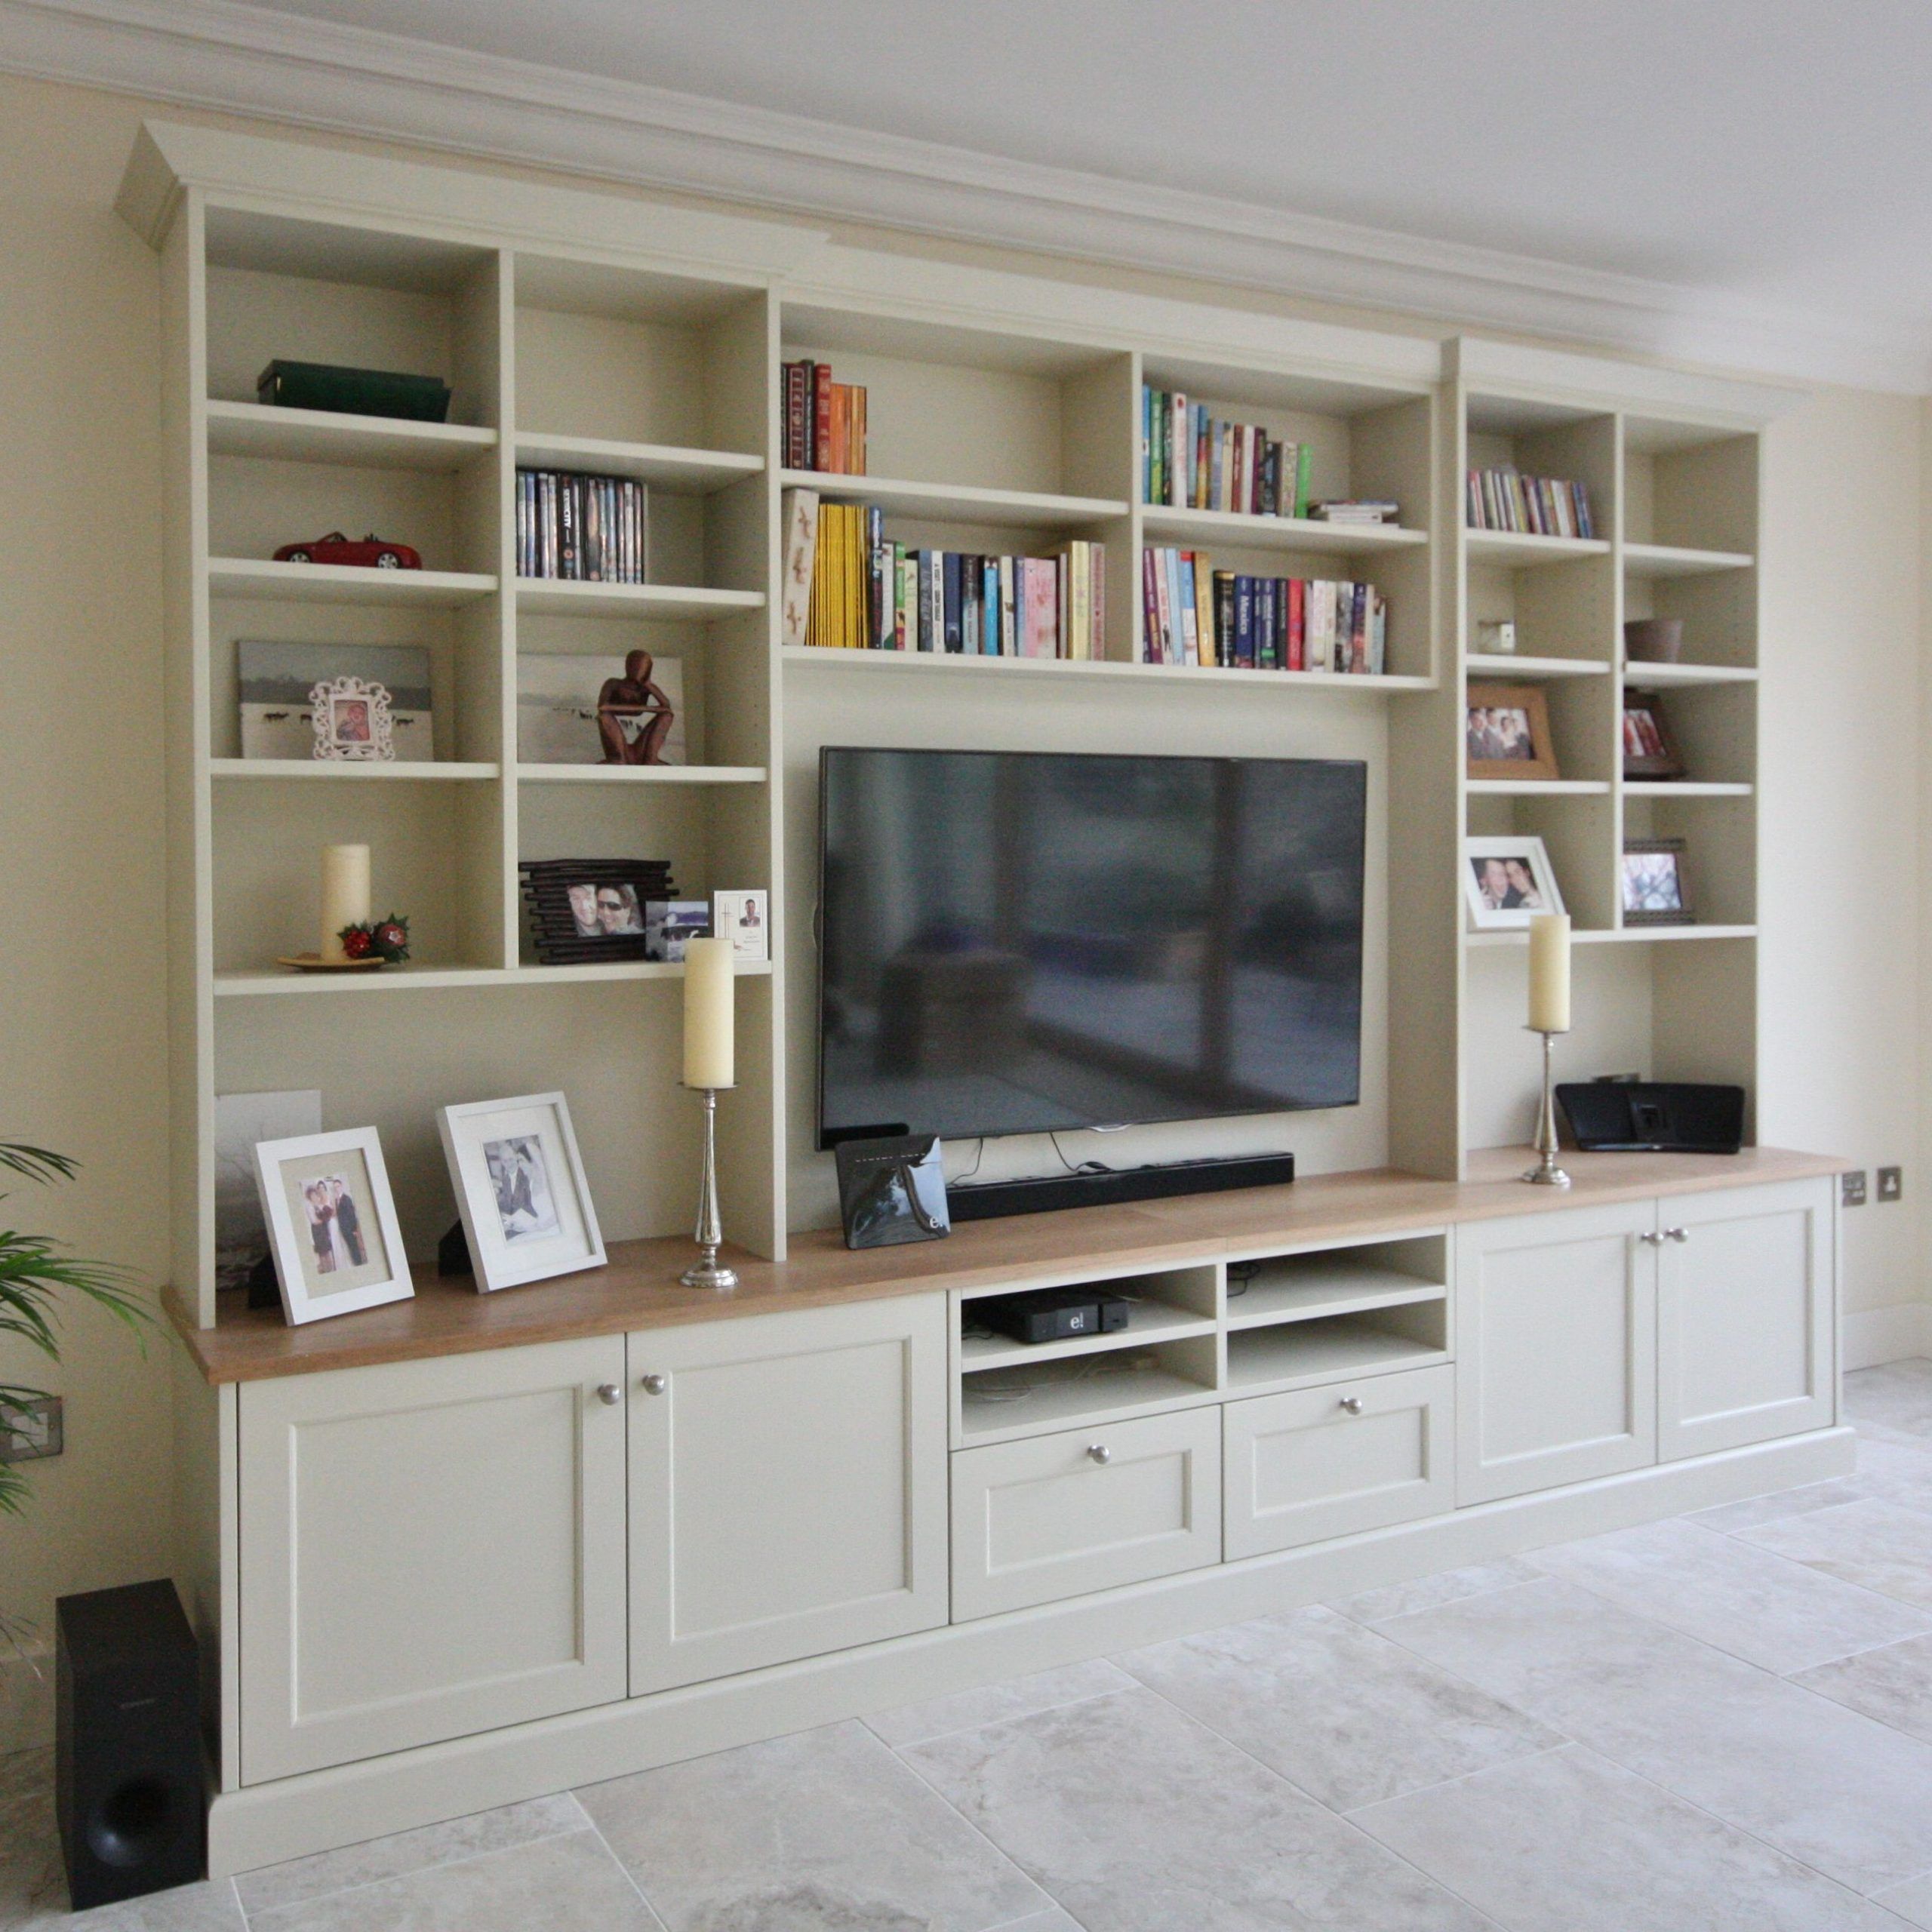 Enigma Design » Hand Painted Tv Unit | Bookshelves In With Regard To Bespoke Tv Cabinet (View 4 of 15)